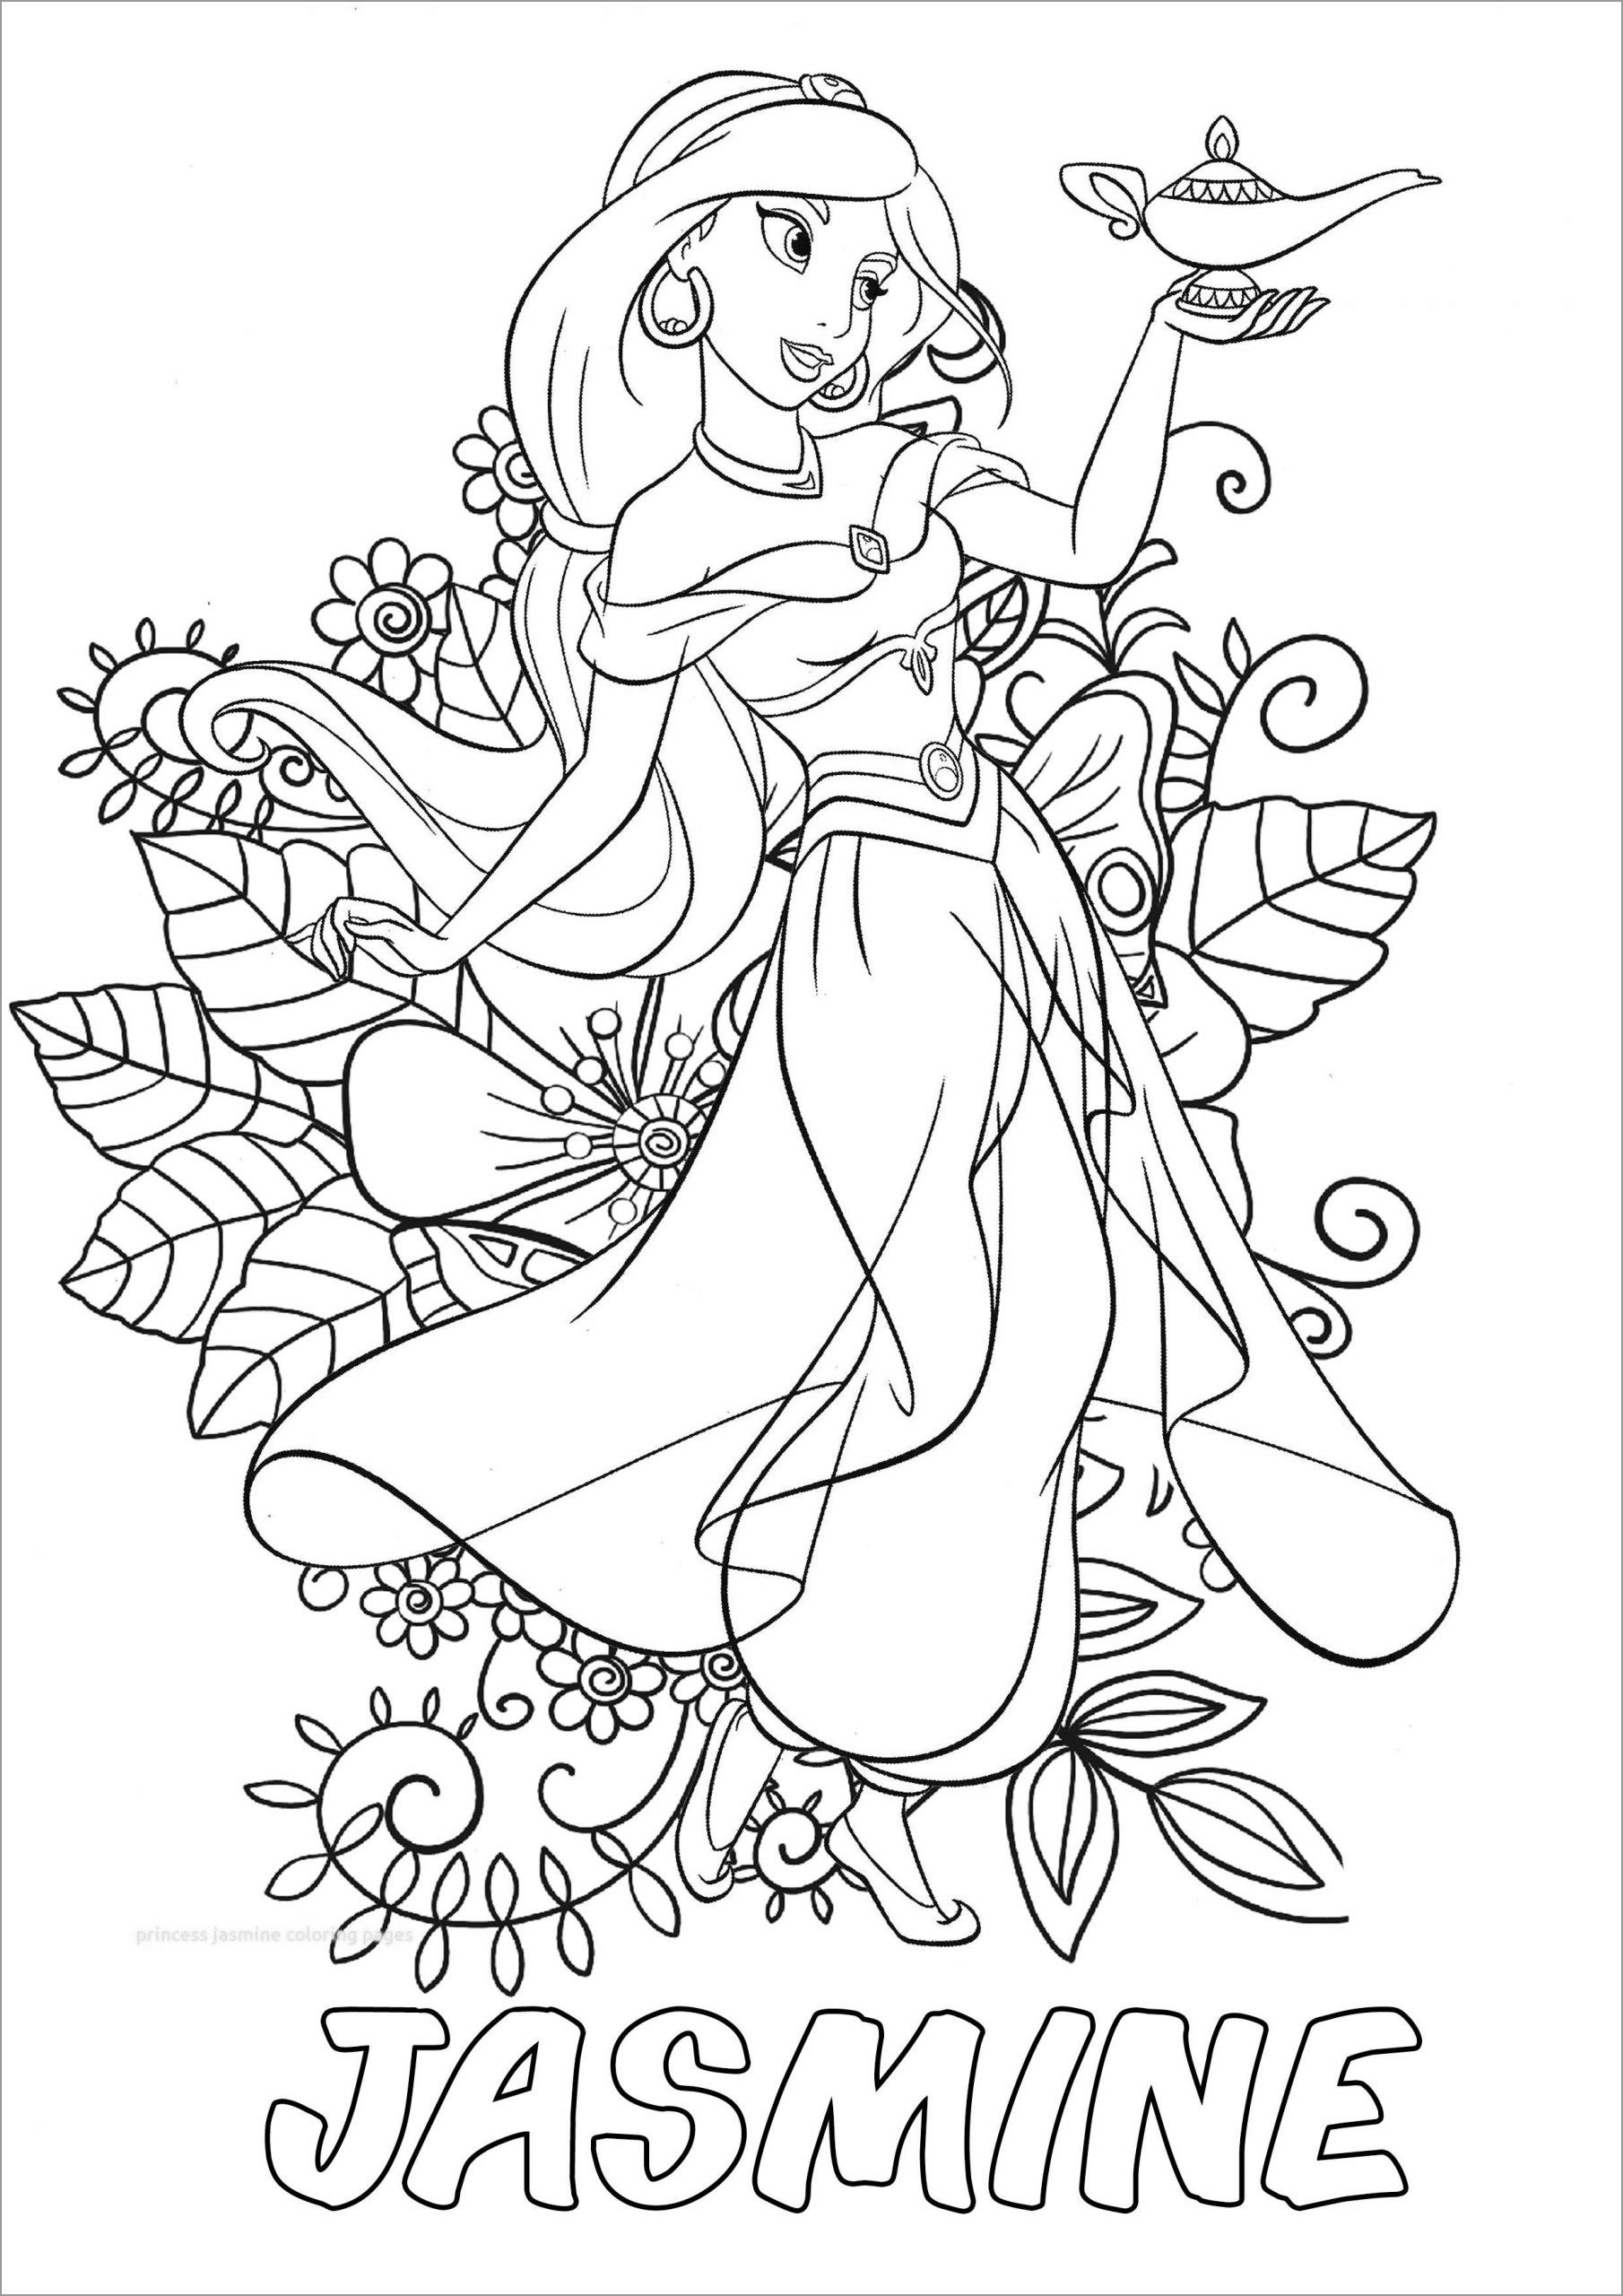 Aladdin Coloring Page Jasmine for Adults   ColoringBay